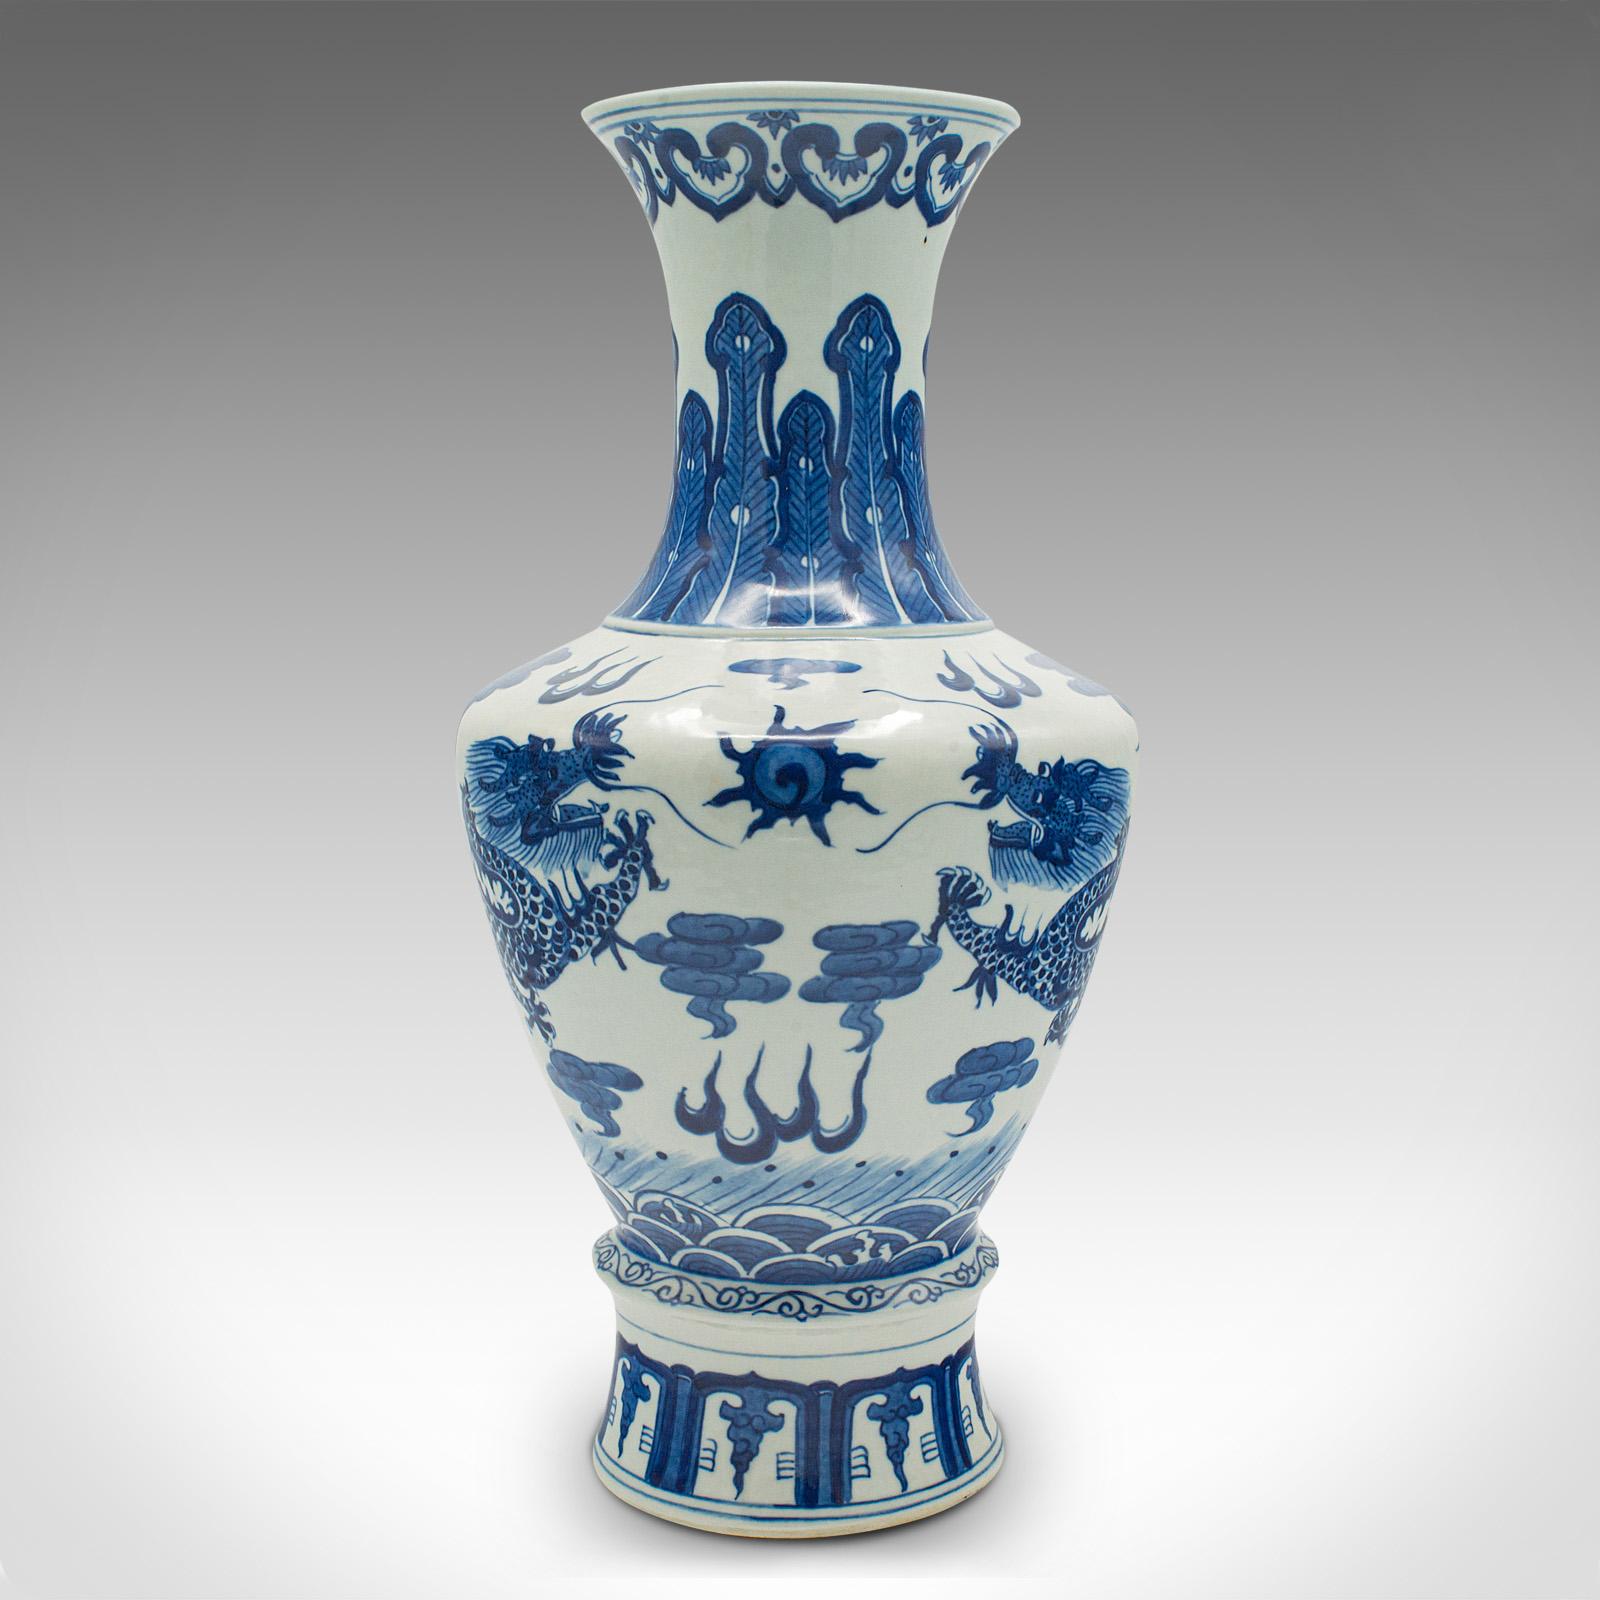 This is a large vintage white and blue vase. A Chinese, ceramic decorative flower baluster, dating to the late Art Deco period, circa 1940.

Generously sized decorative flower vase with strong Oriental overtones
Displaying a desirable aged